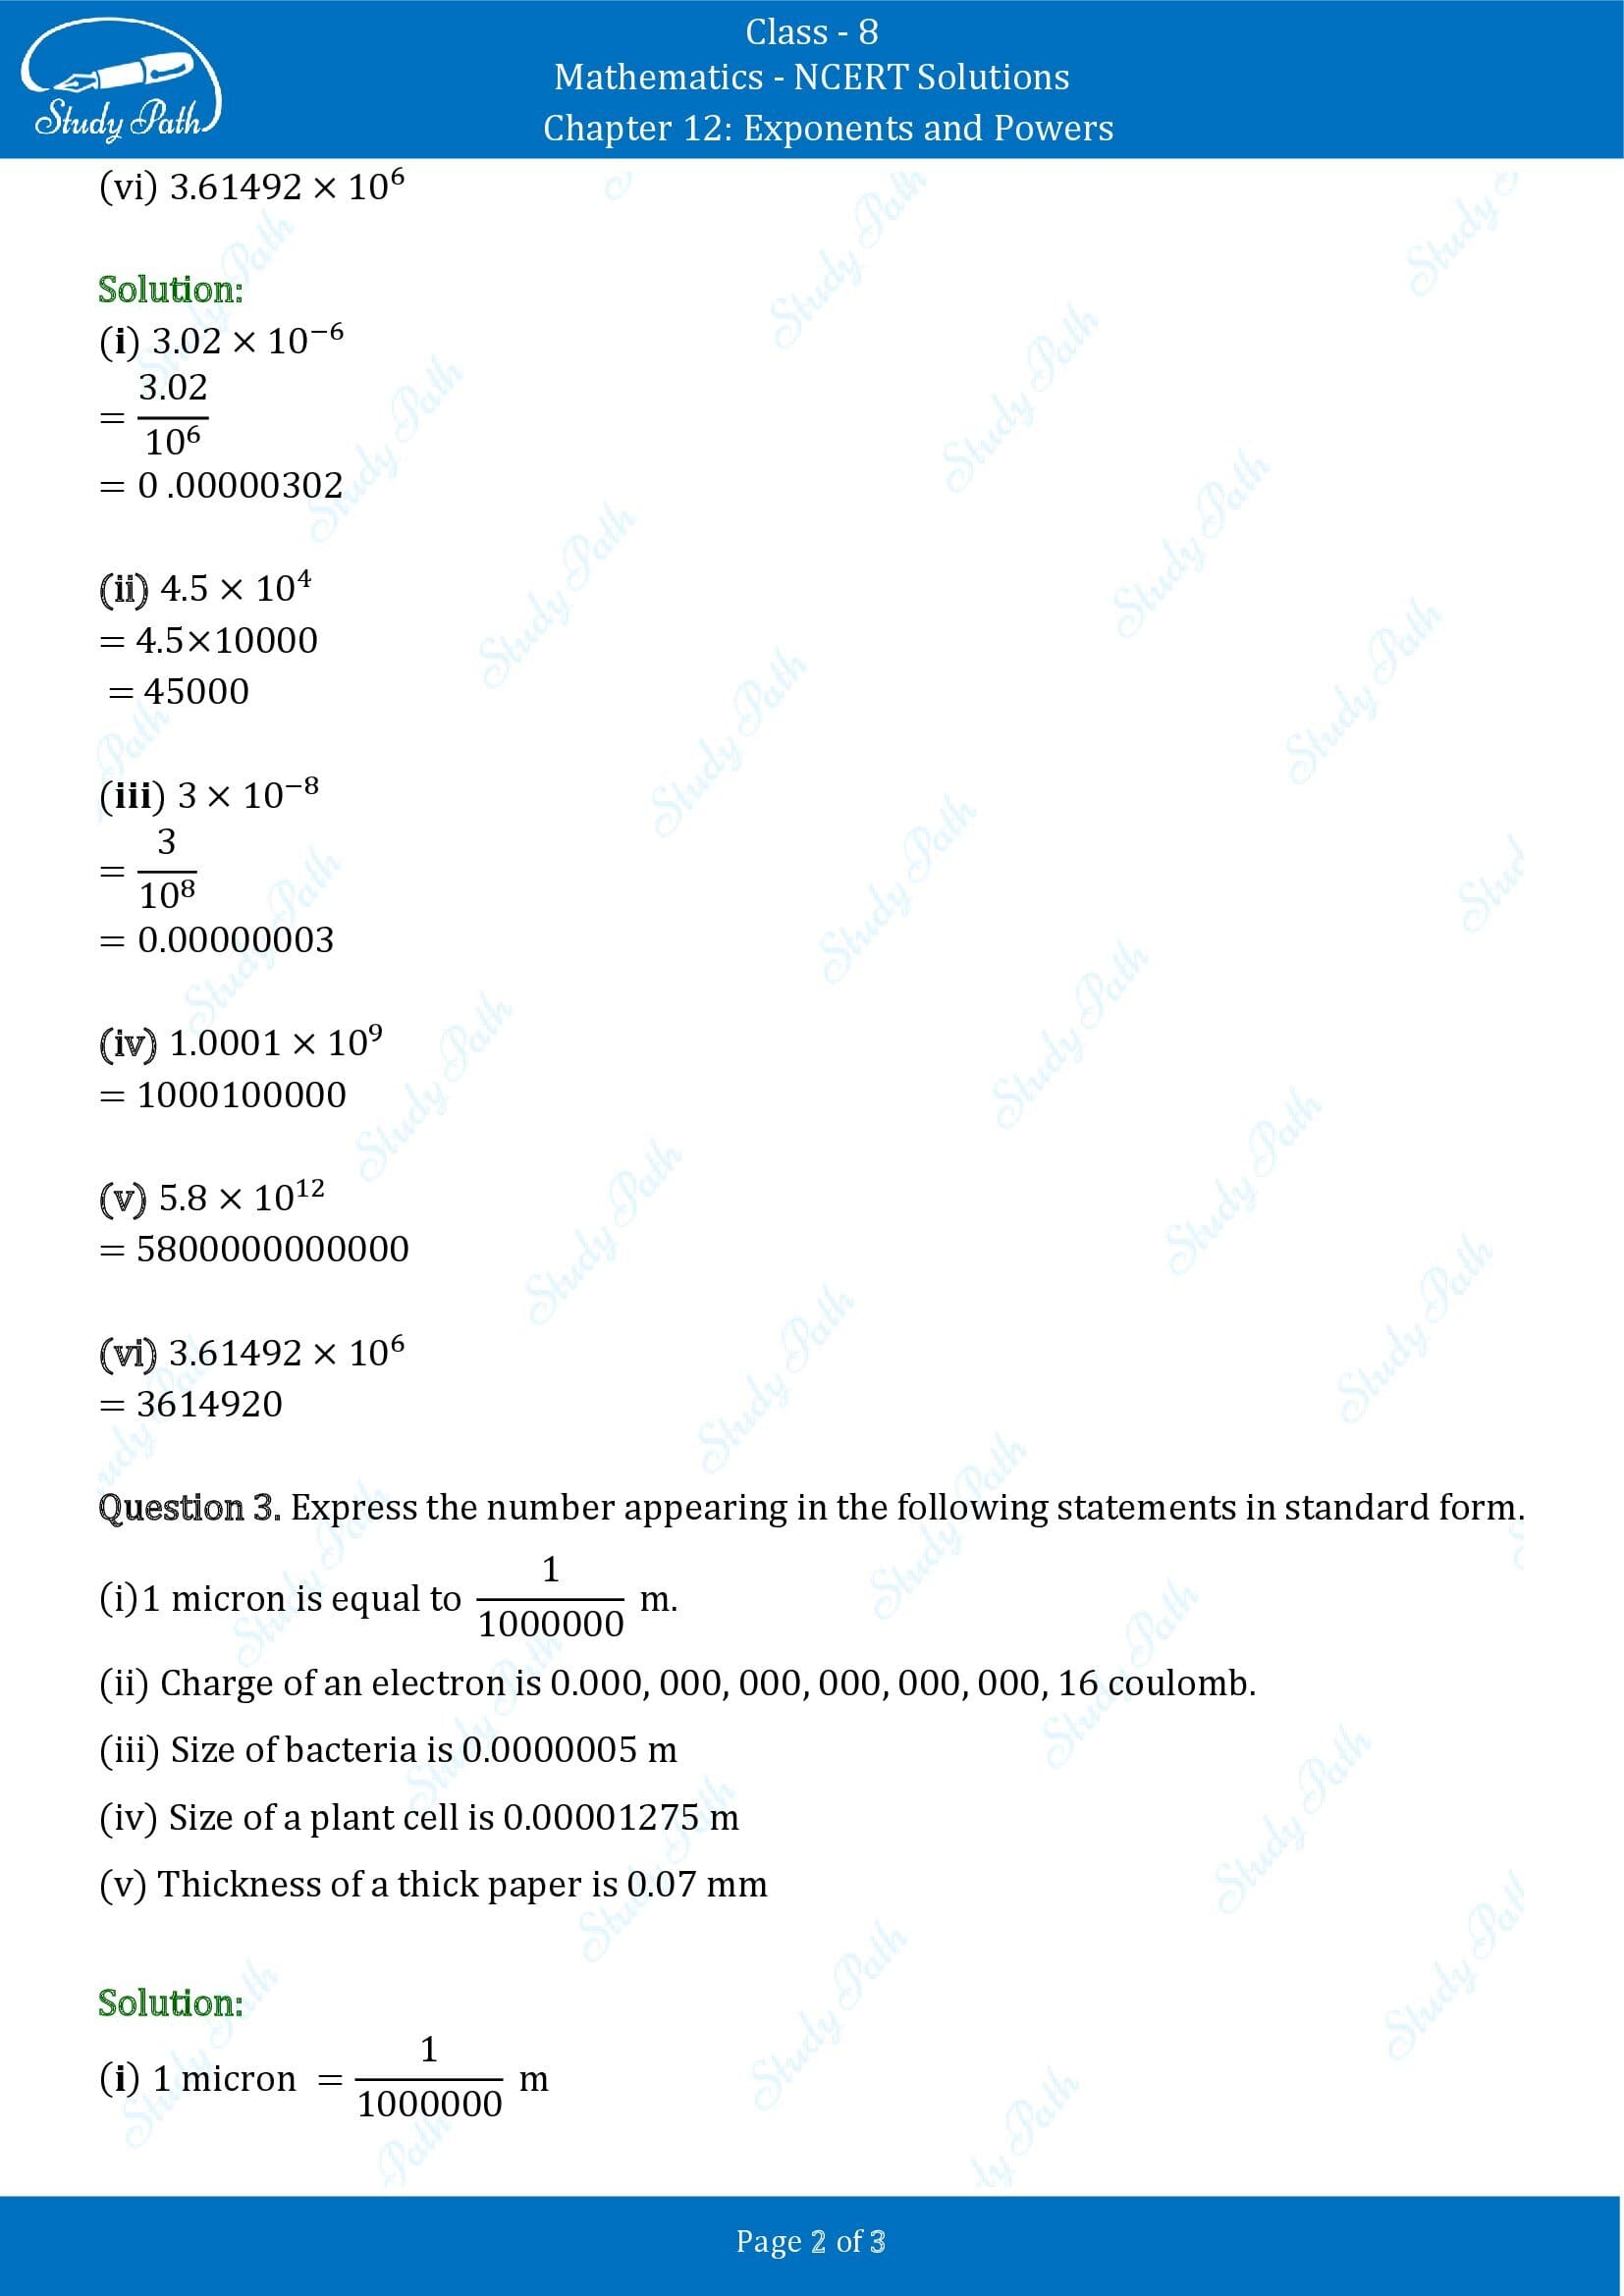 NCERT Solutions for Class 8 Maths Chapter 12 Exponents and Powers Exercise 12.2 00002